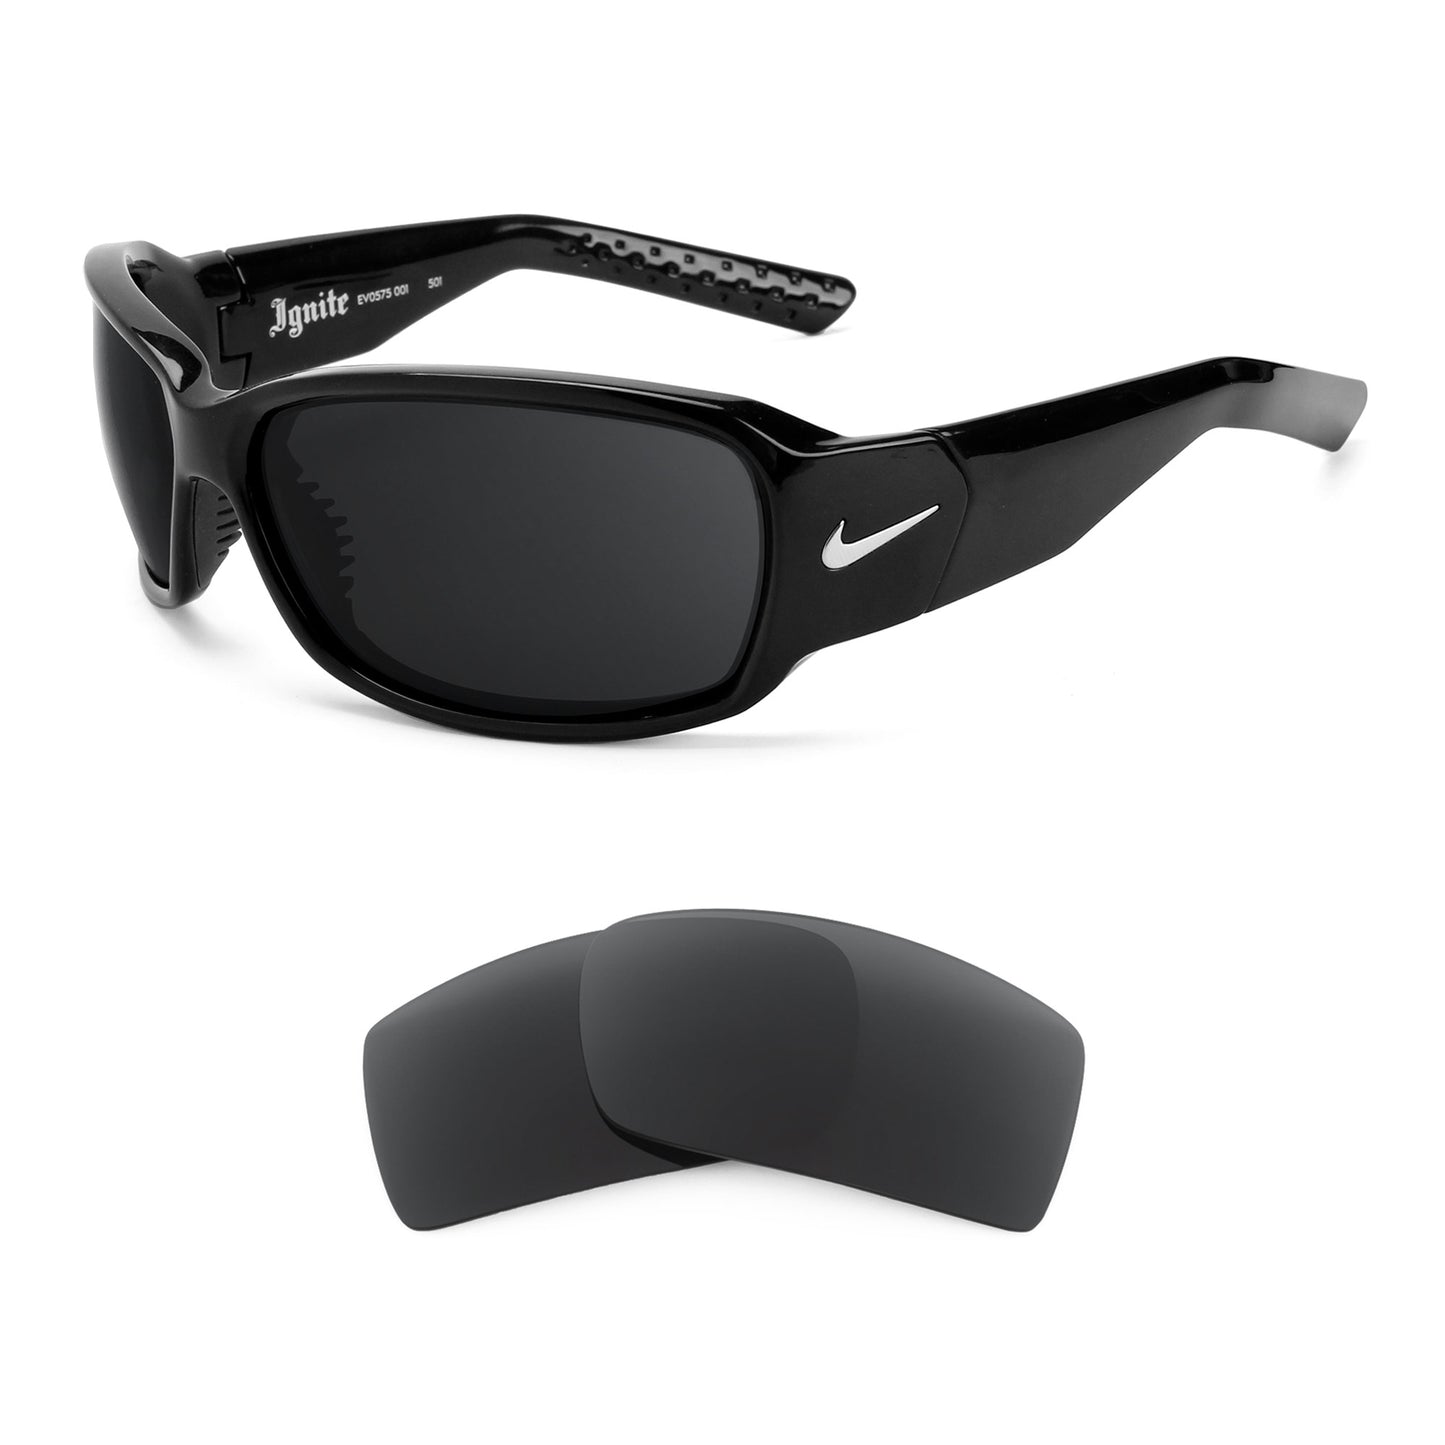 Nike Ignite sunglasses with replacement lenses